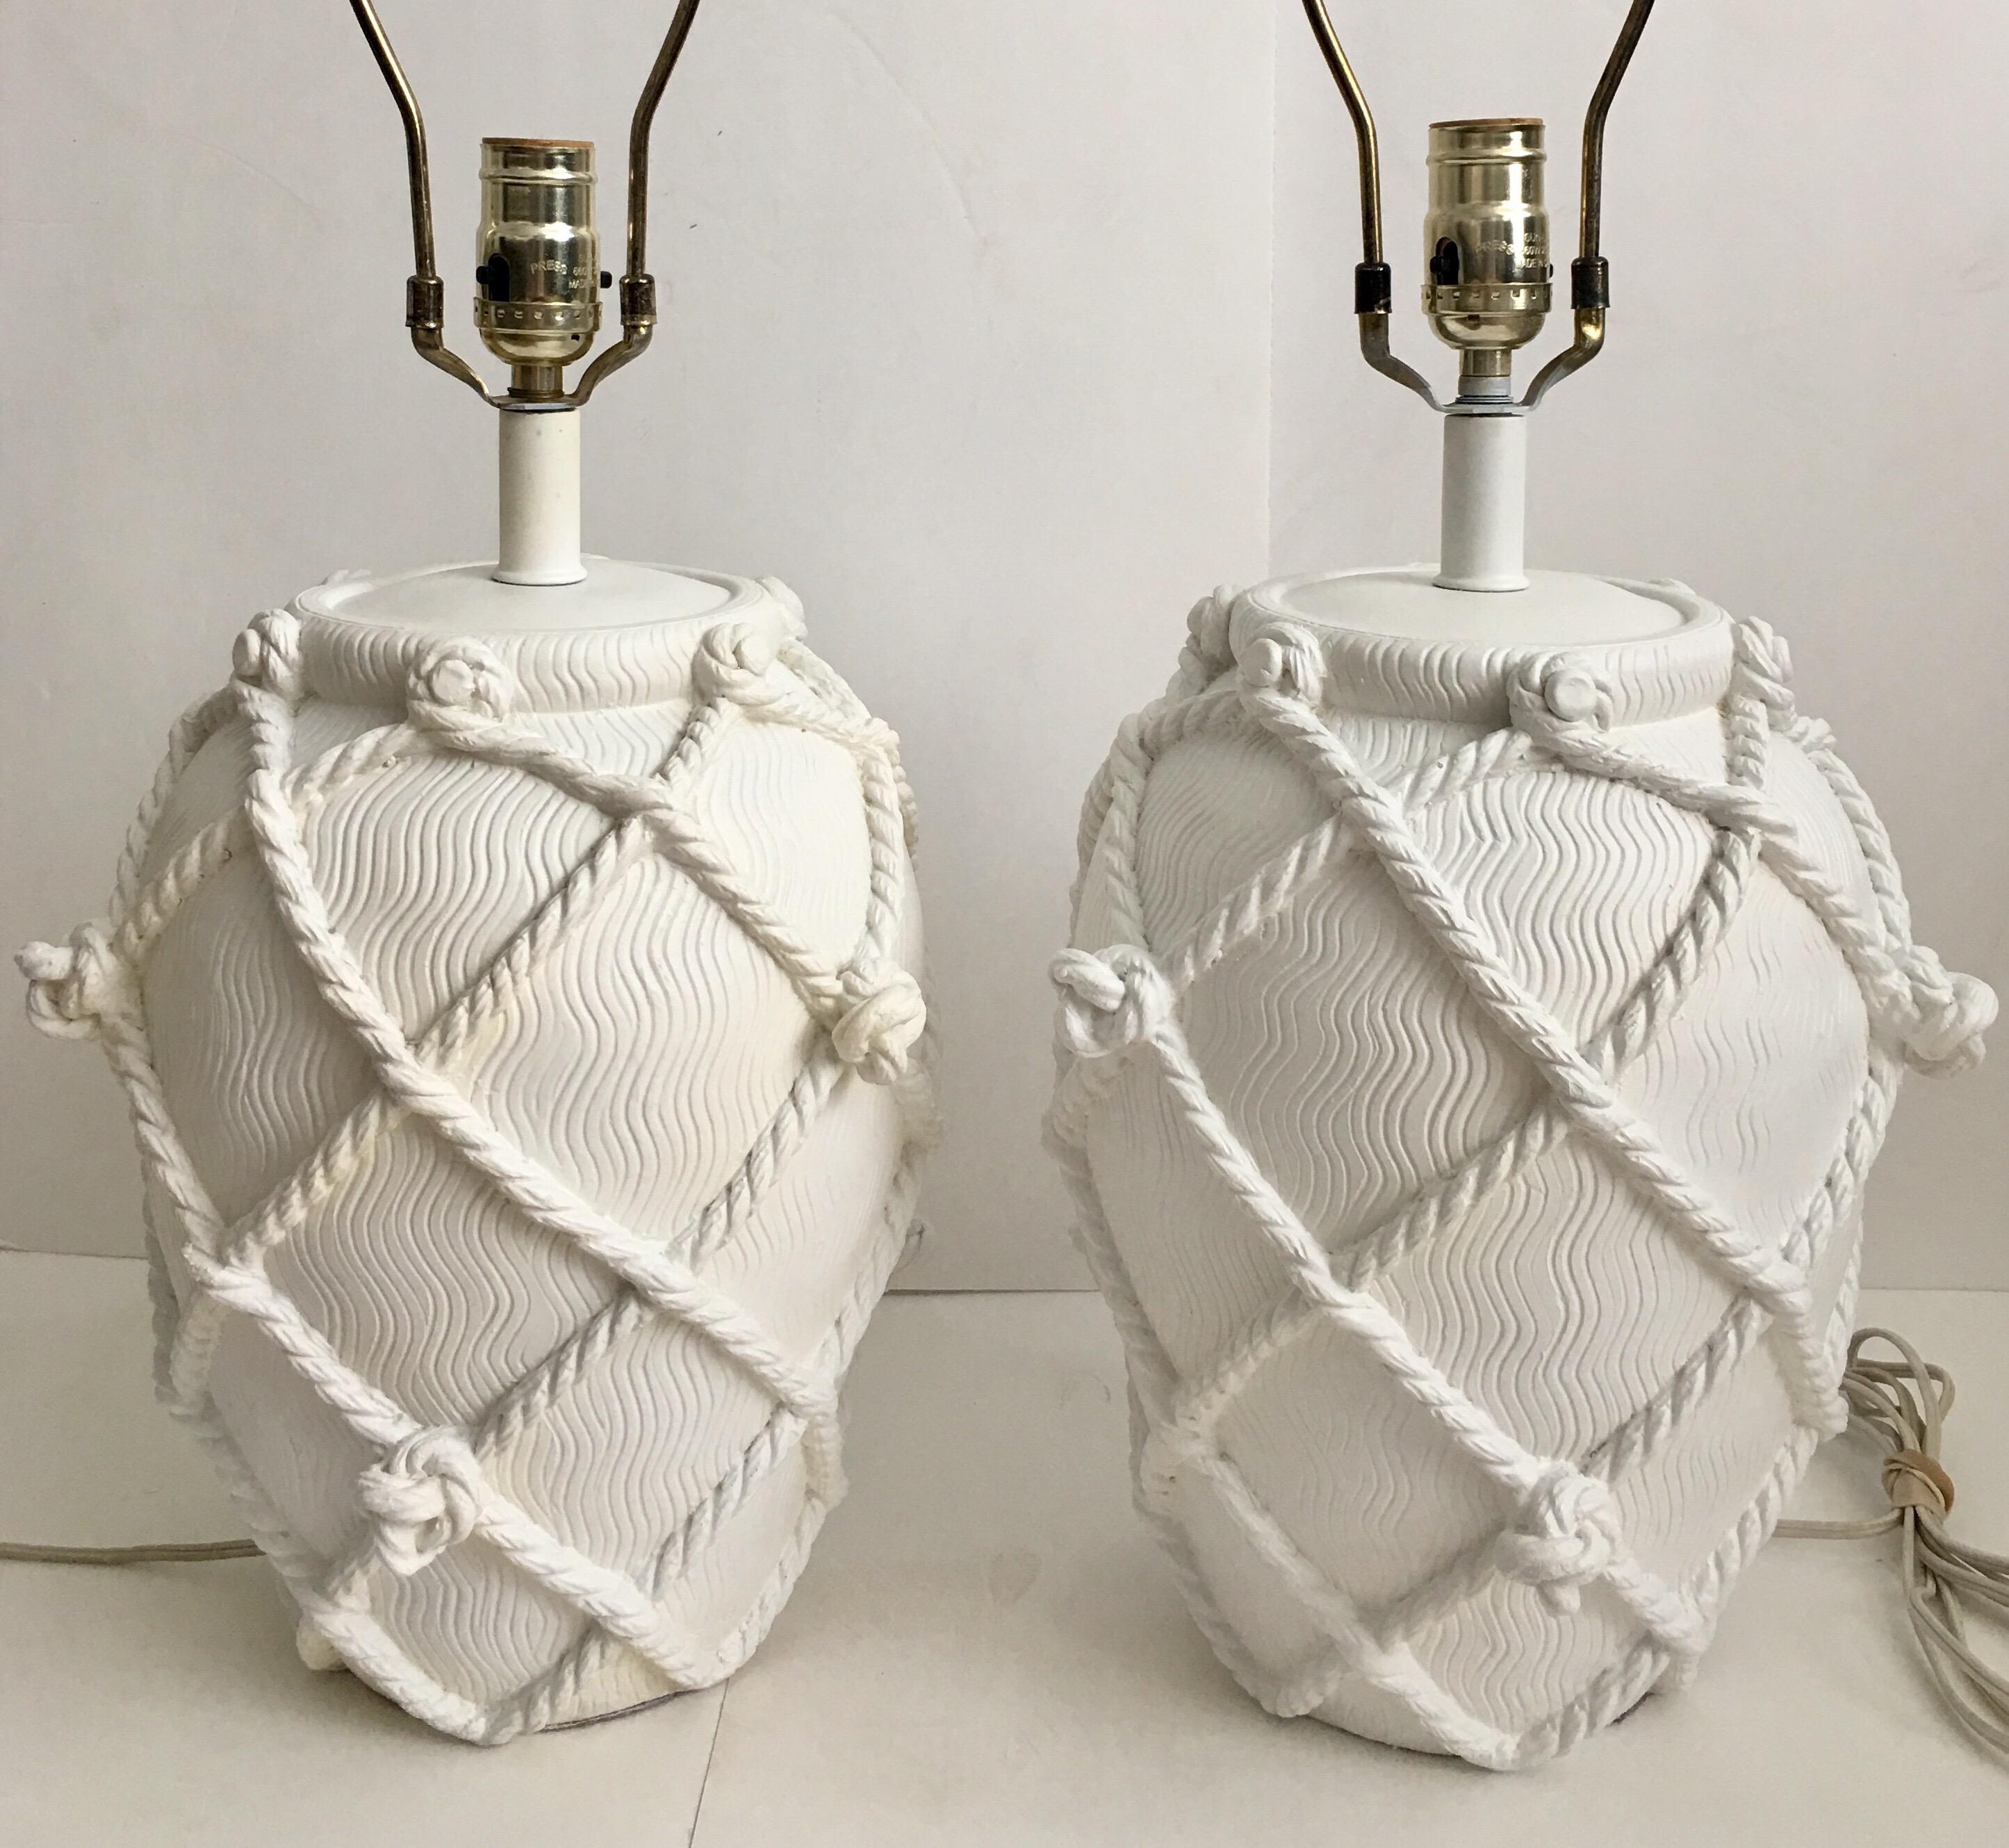 Pair of midcentury matte white ginger jar table lamps featuring a faux knotted rope design. 

25 inches high to finial.
18 inches high to socket.